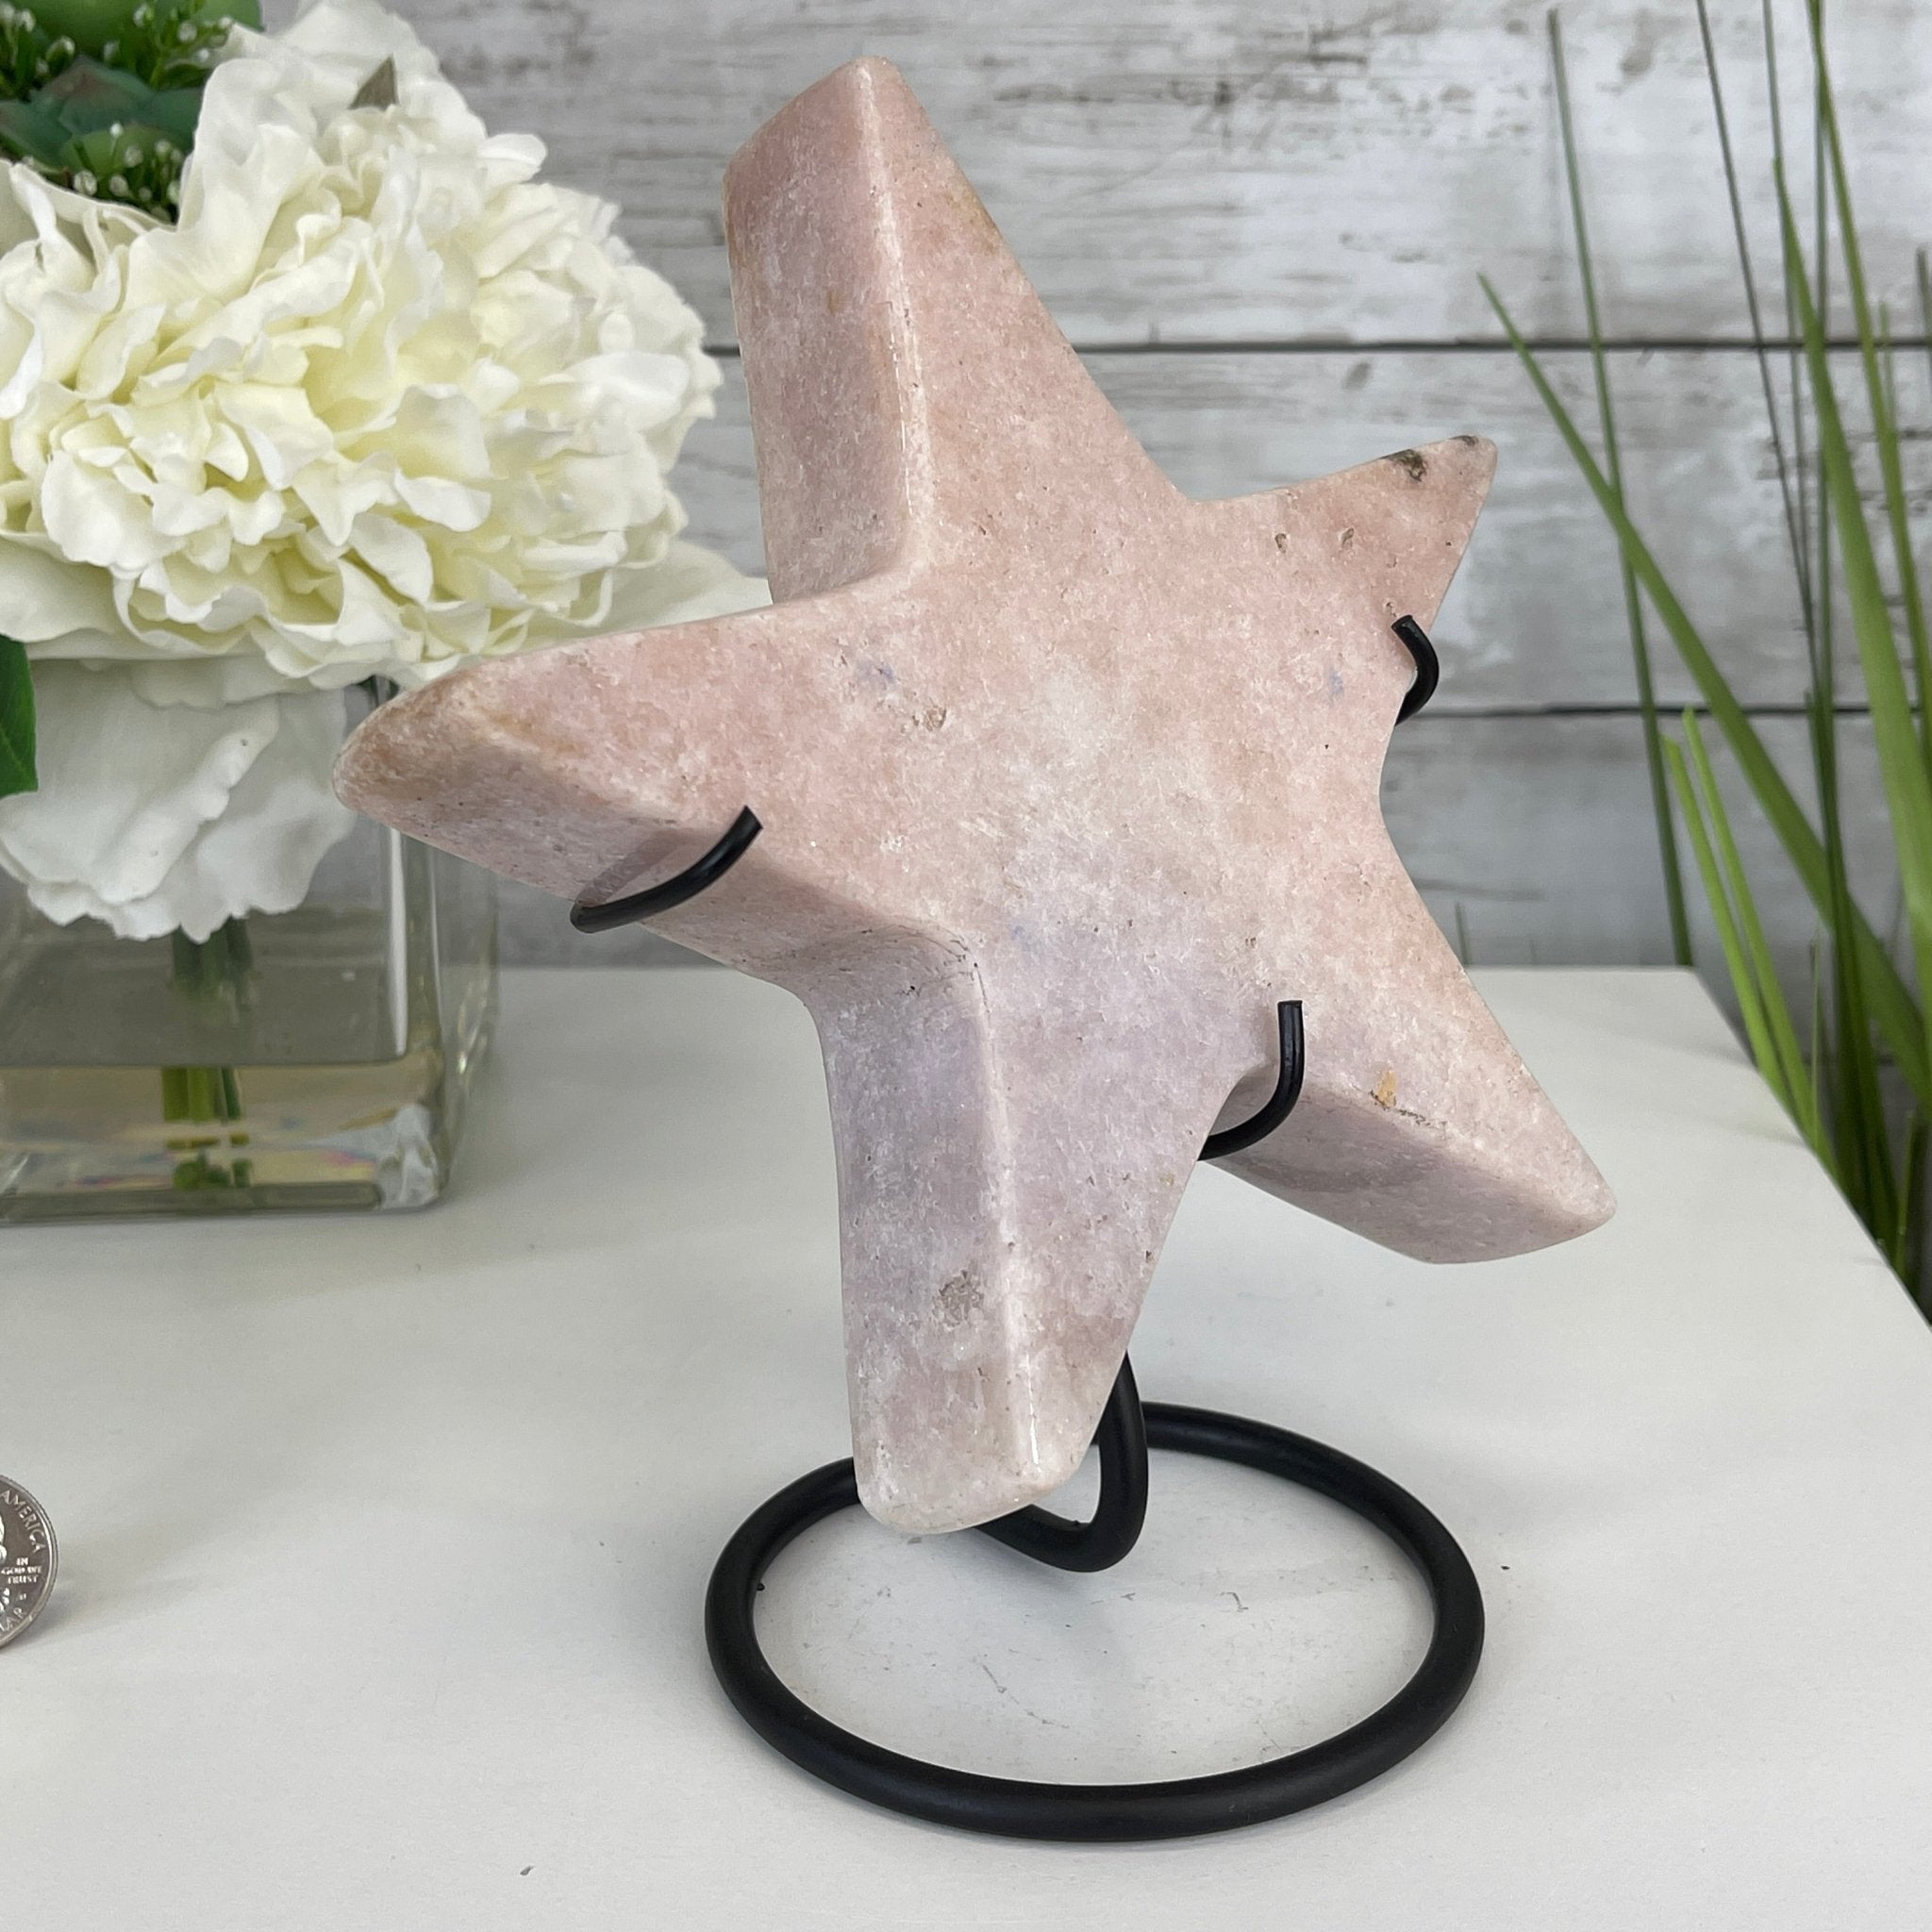 Pink Amethyst Star on a Metal Stand 8" Tall #5746-0015 by Brazil Gems - Brazil GemsBrazil GemsPink Amethyst Star on a Metal Stand 8" Tall #5746-0015 by Brazil GemsStars5746-0015